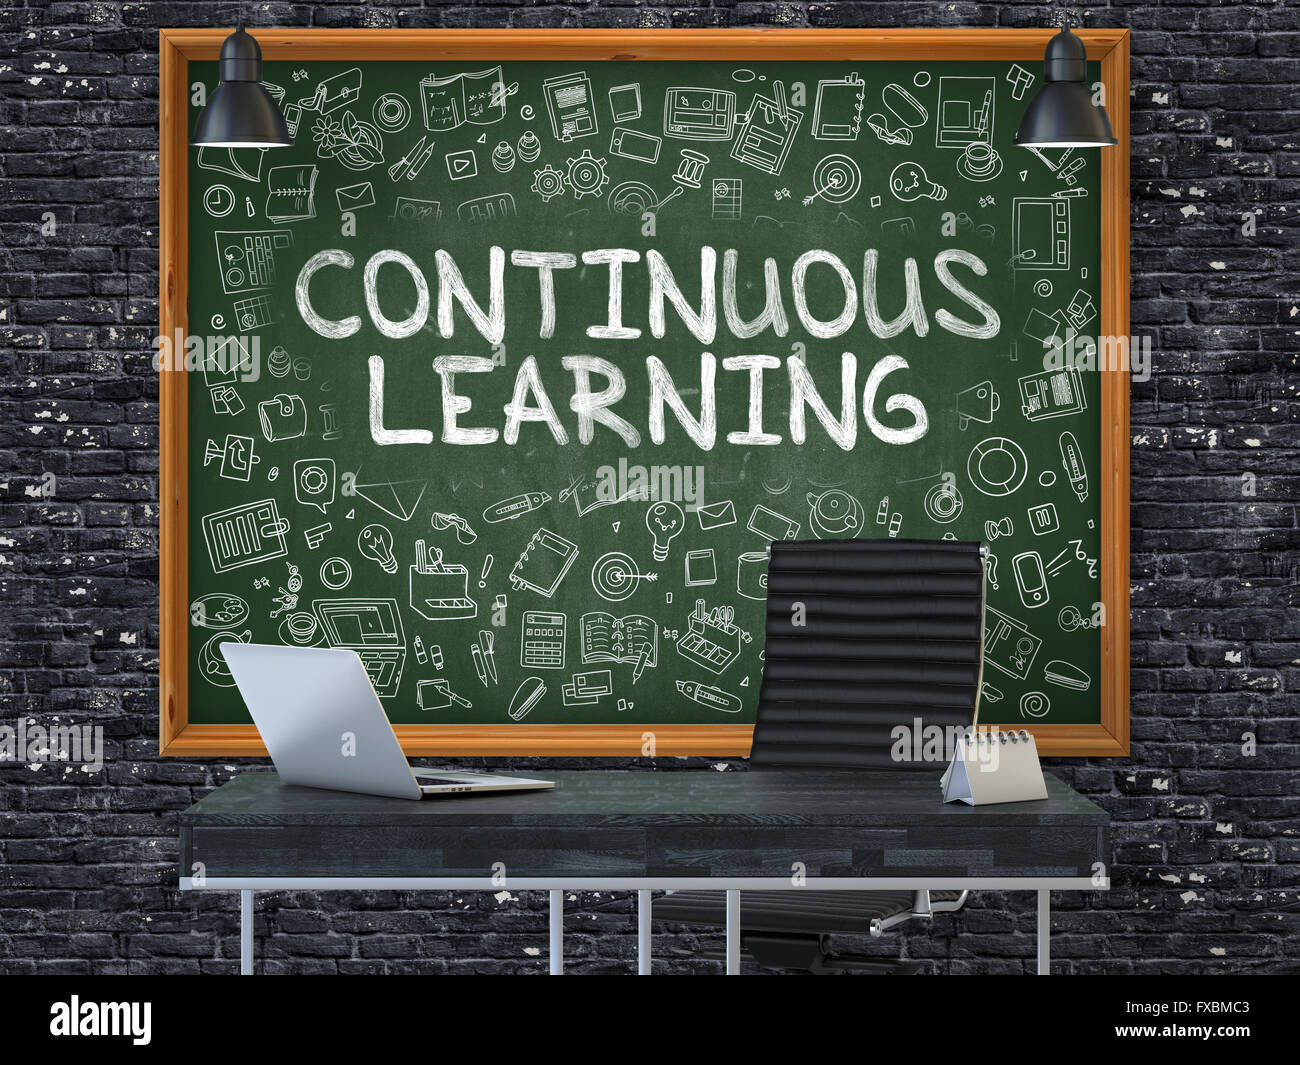 Hand Drawn Continuous Learning on Office Chalkboard. Stock Photo